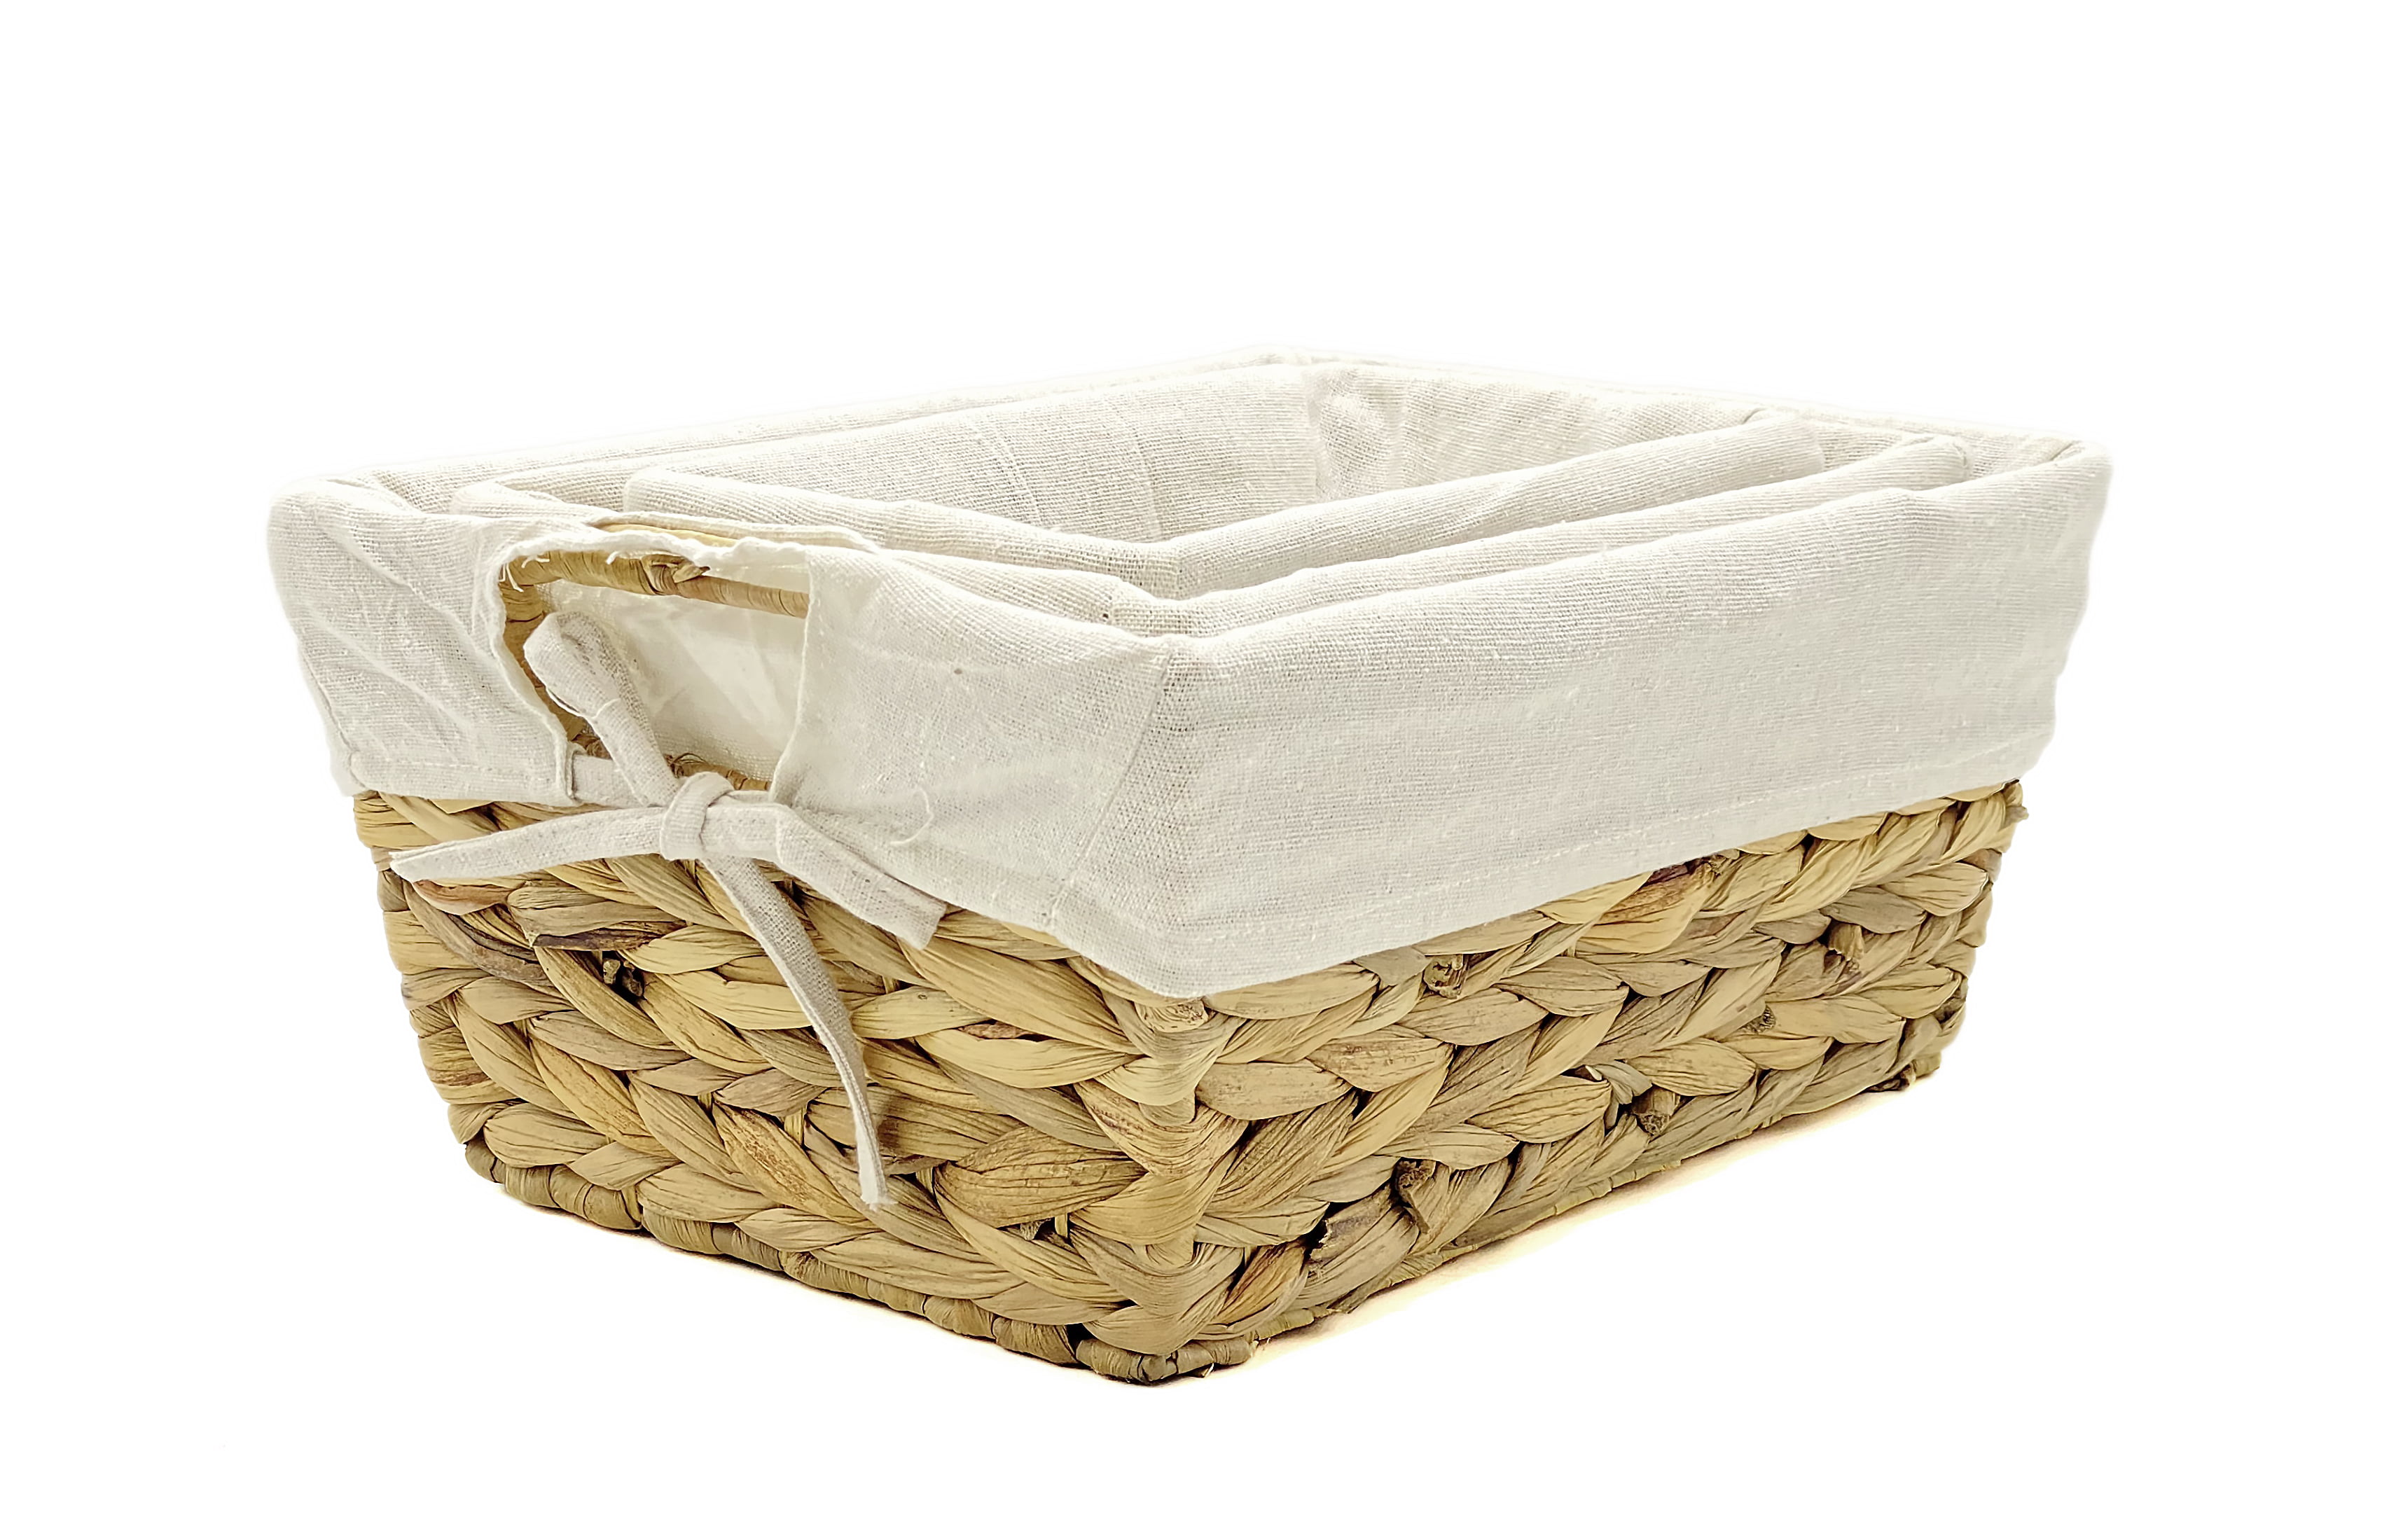 3-Piece Hyacinth Nested Baskets with Liners by Handcrafted 4 Home 